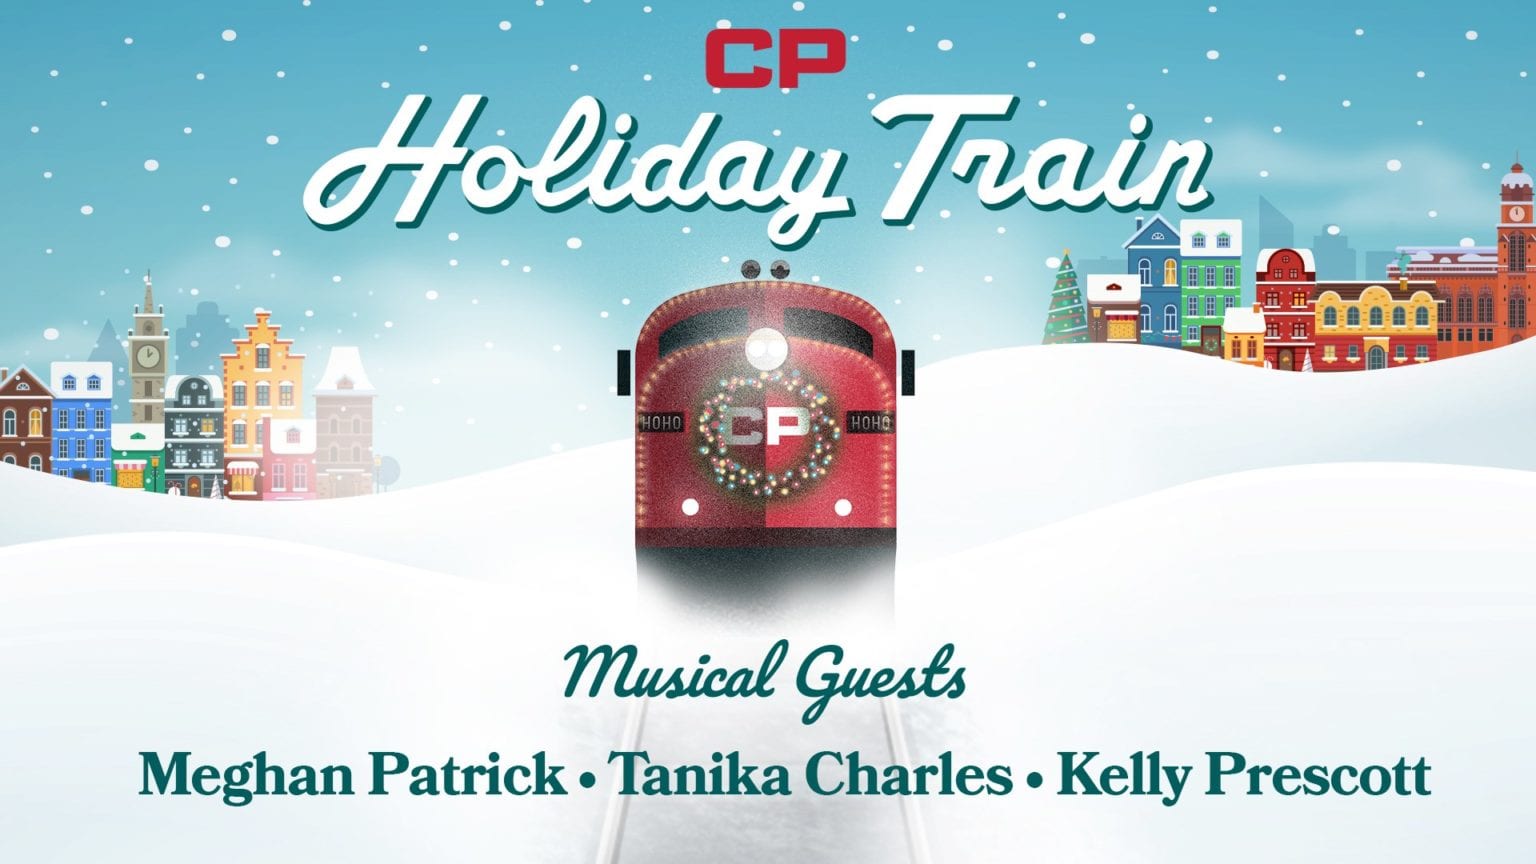 CP Holiday Train Rolls into the Quad Cities! Quad Cities >